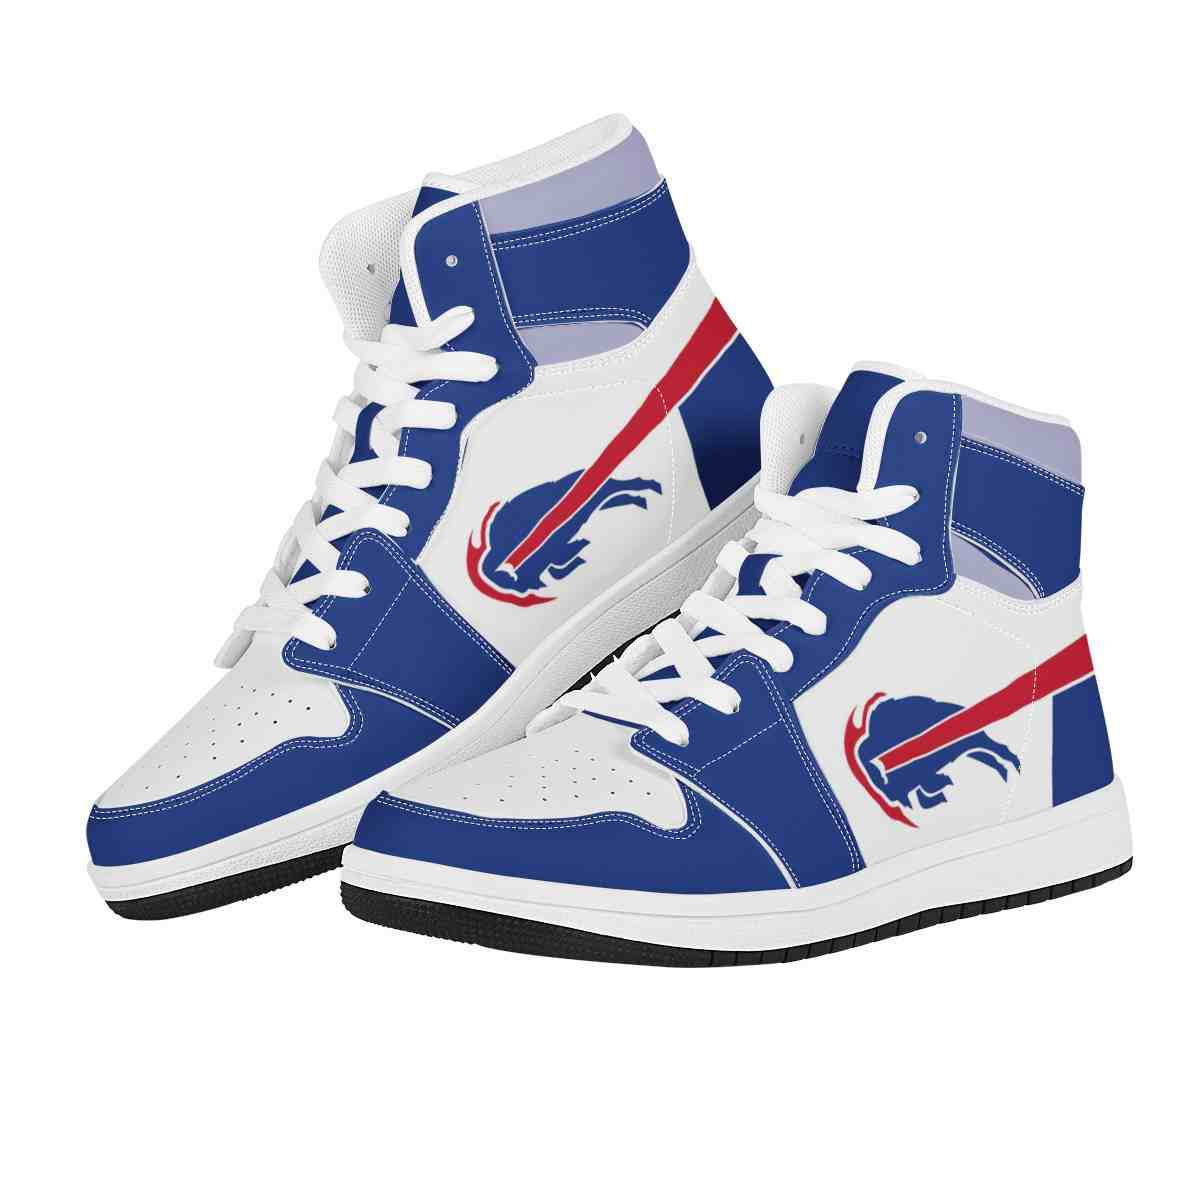 NFL Customized  shoes Buffalo Bills High Top Leather AJ1 Sneakers 001 Customized  shoes